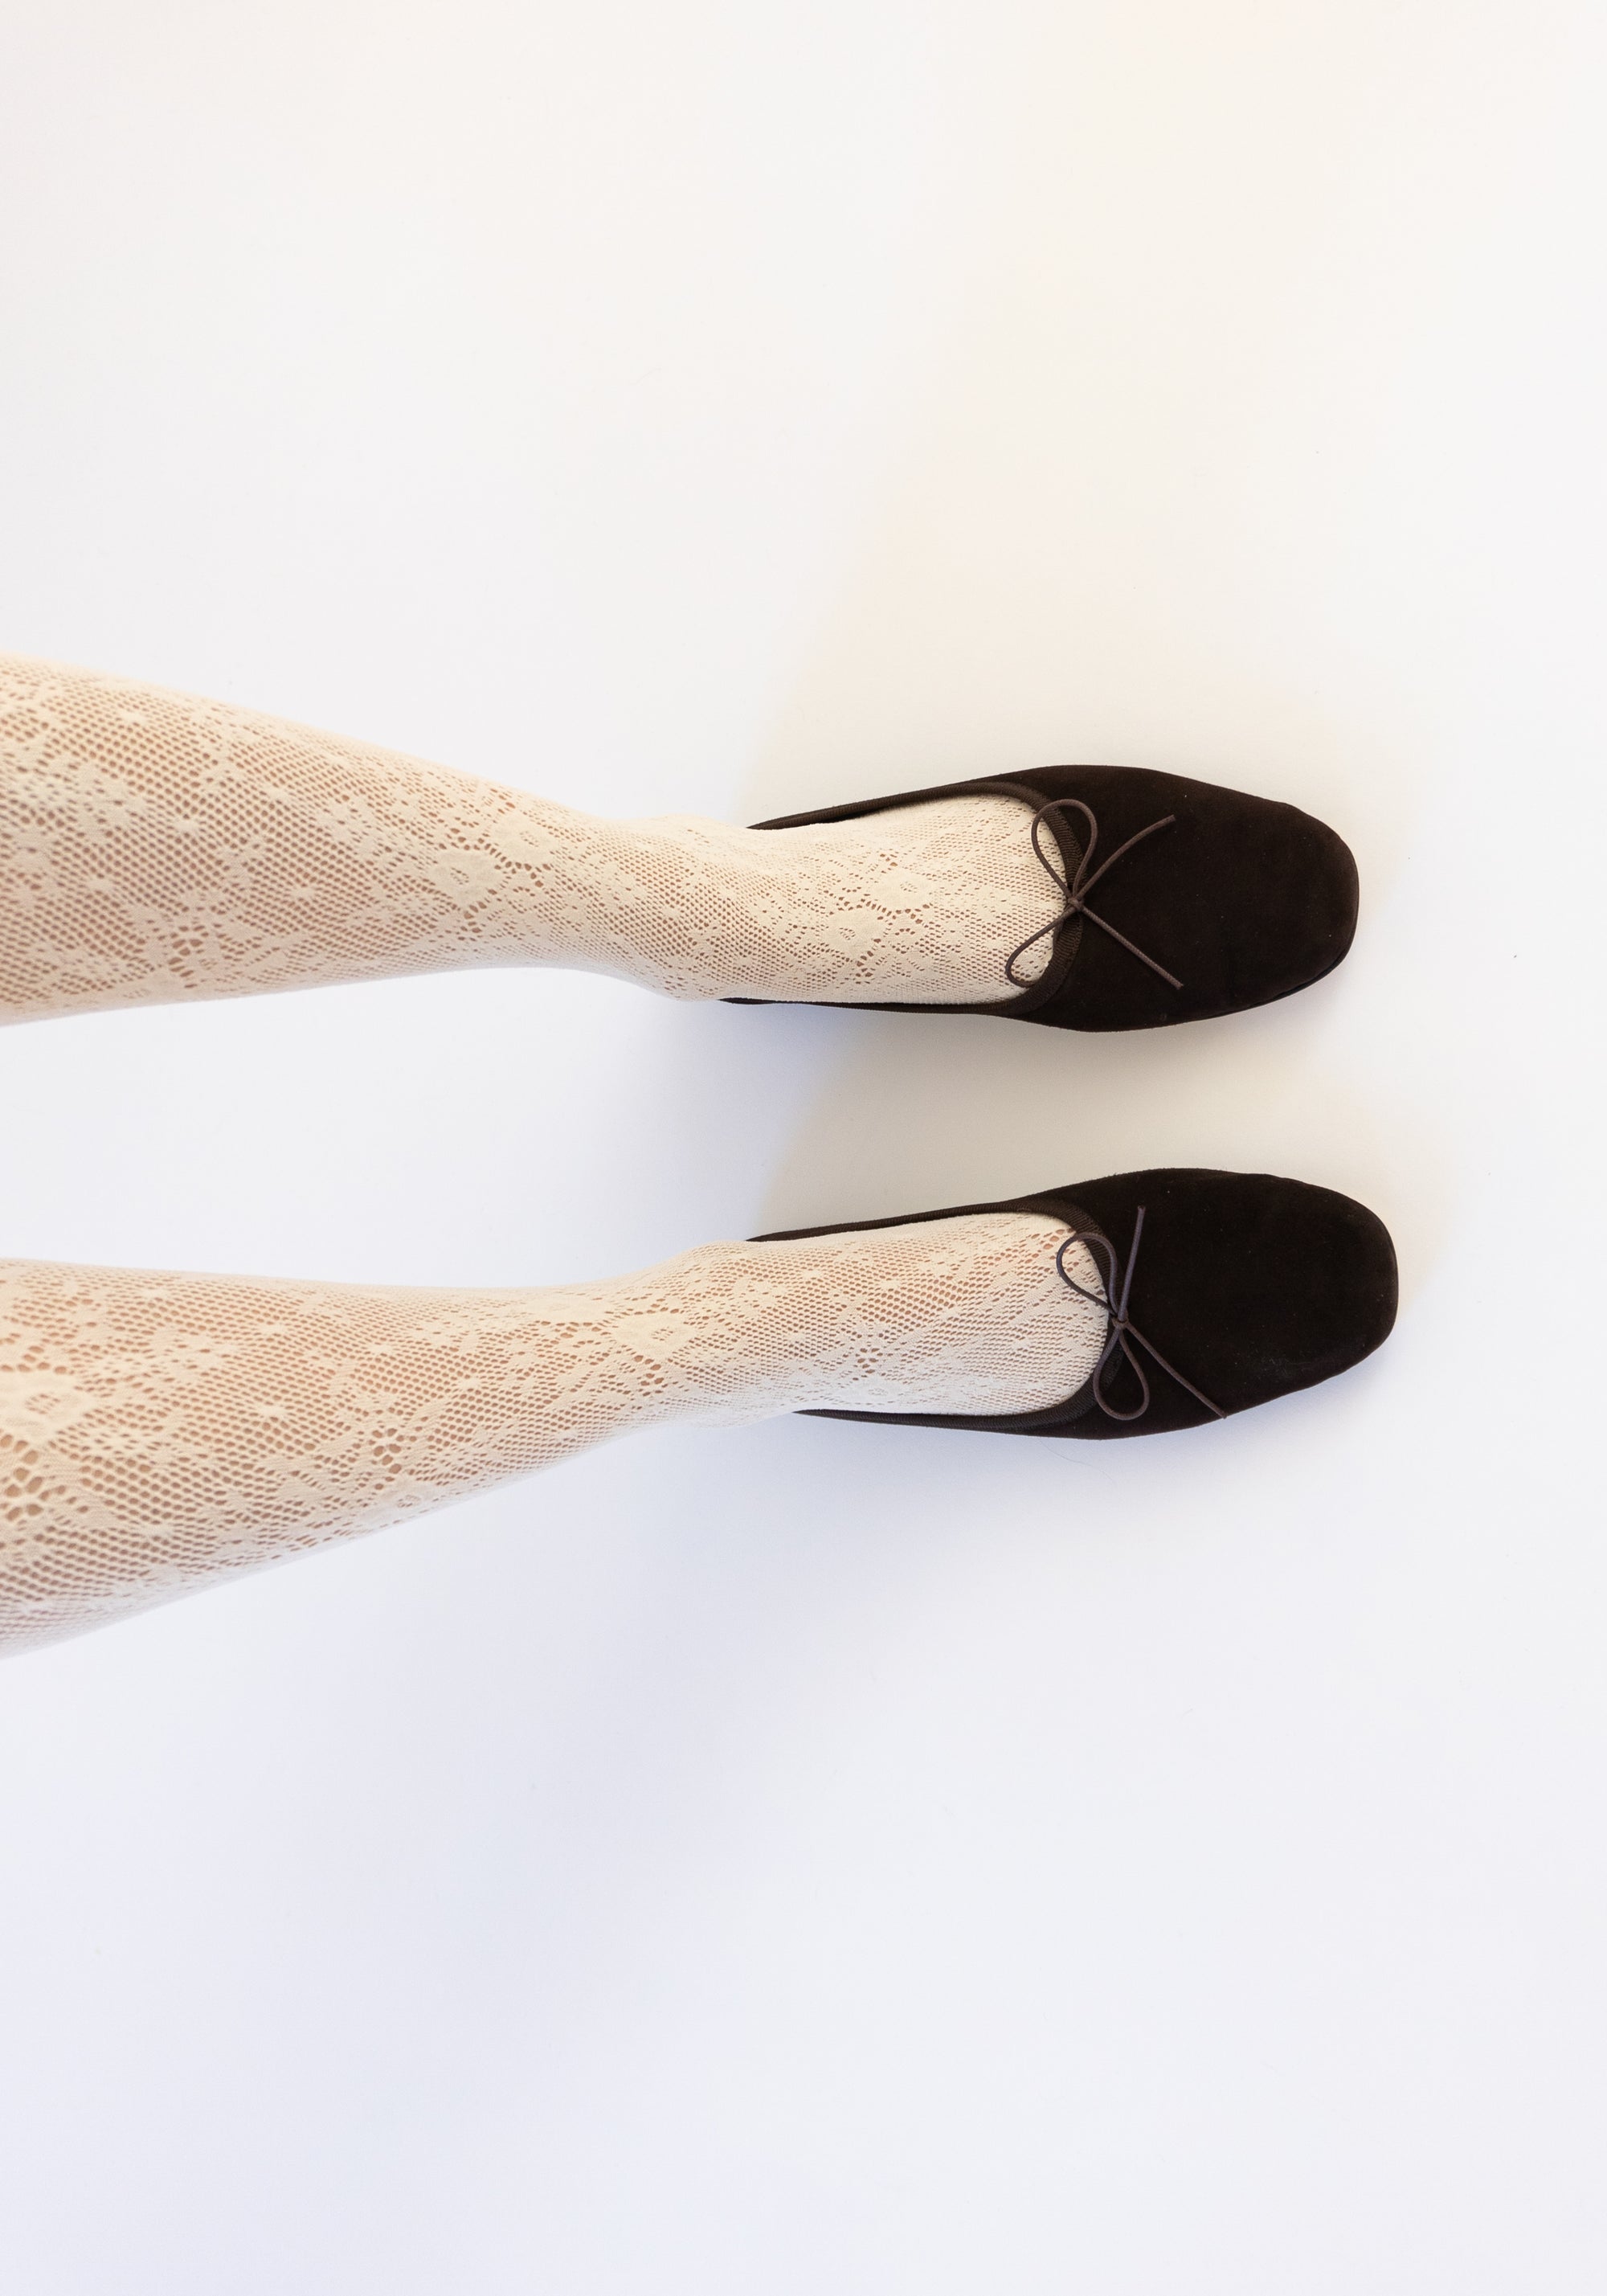 Rosa Lace Tights in Ivory